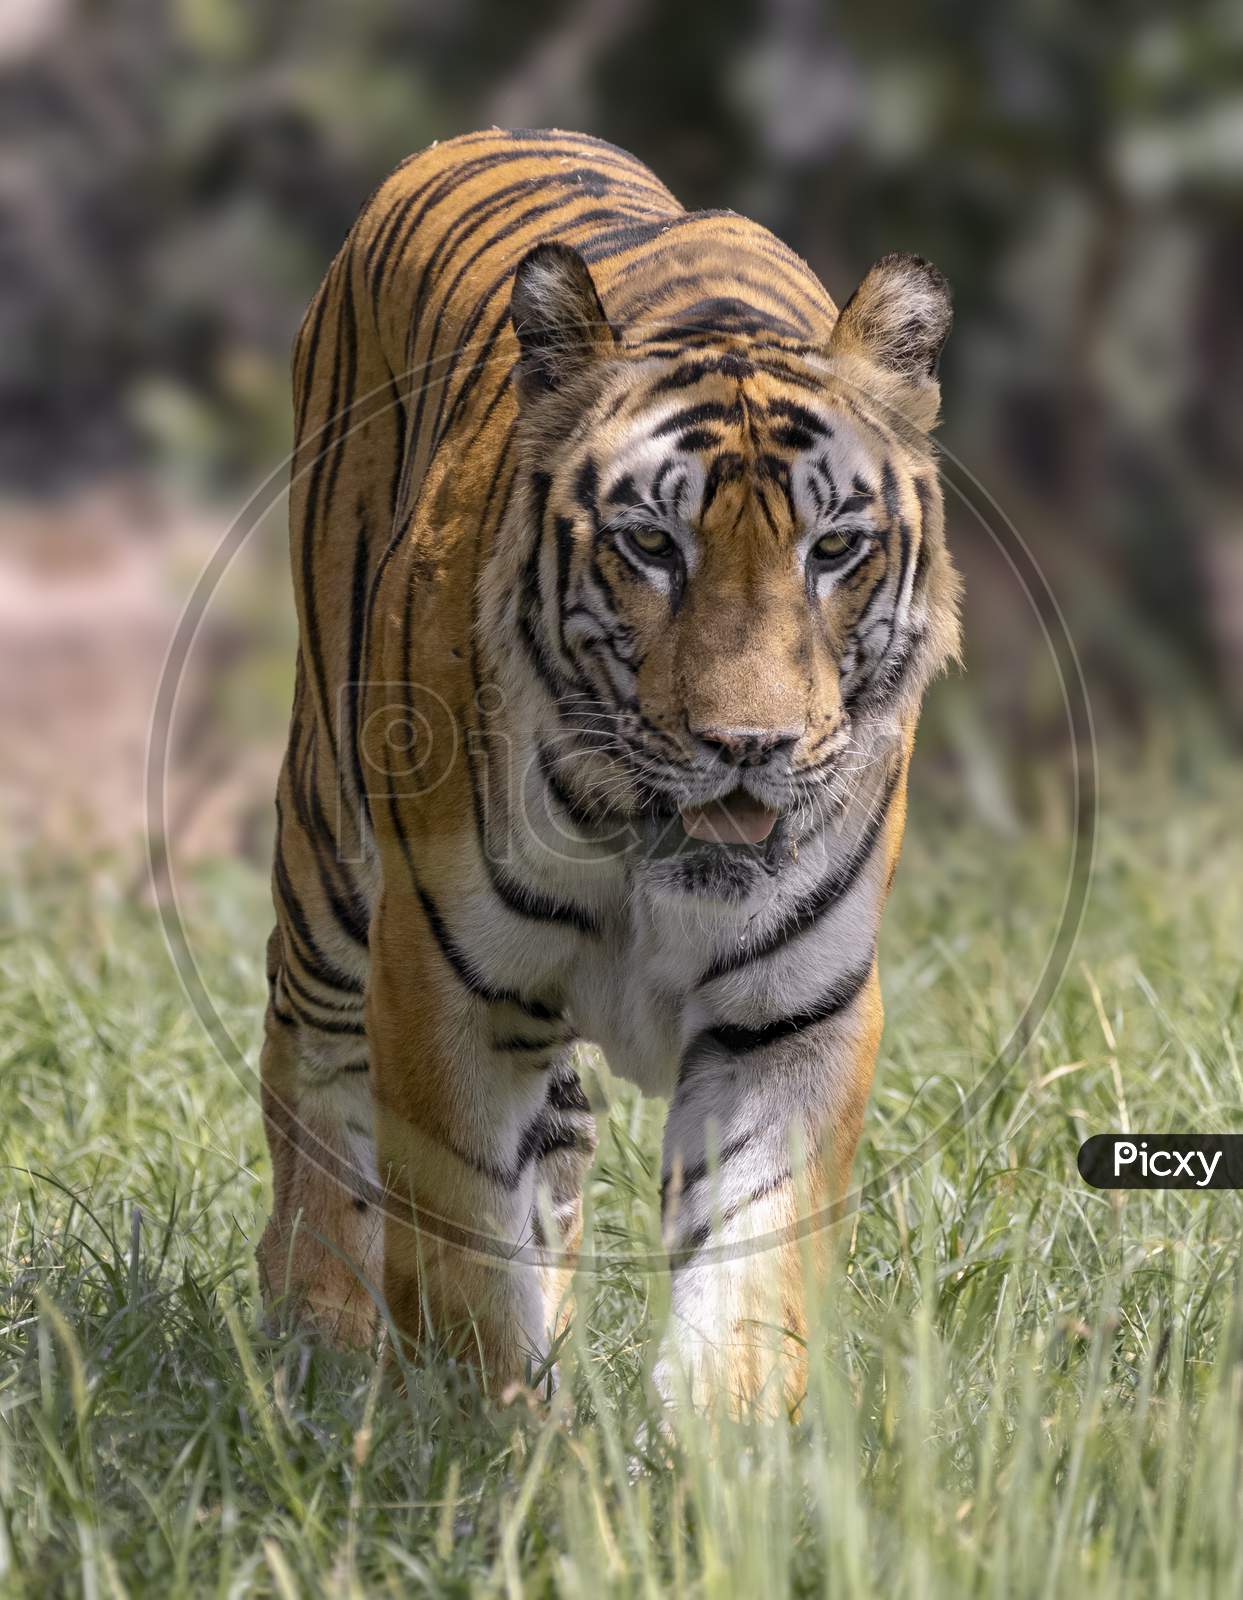 Great Tiger Male In The Nature Habitat. Wildlife Scene With Danger Animal. Hot Summer In India. Dry Area With Beautiful Indian Tiger, Panthera Tigris.